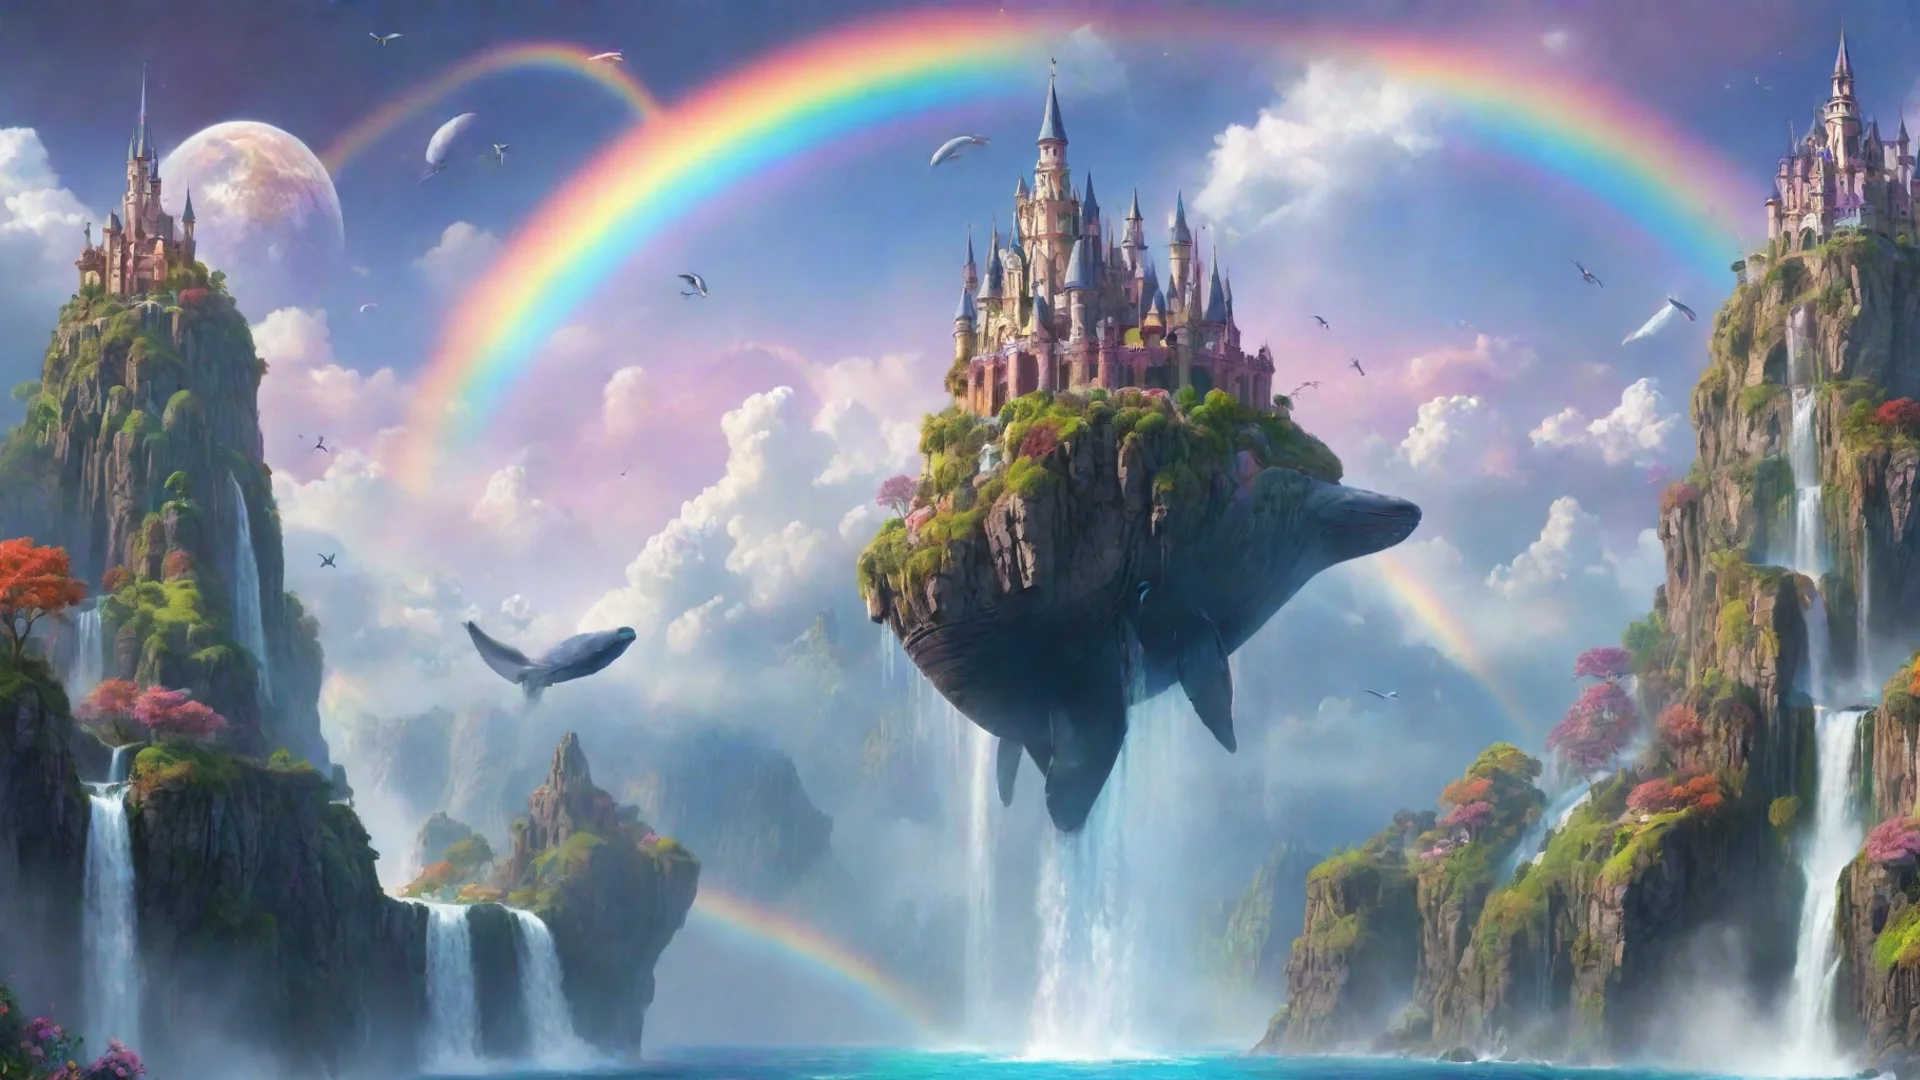 aiartstation art magical world flying whale castle in skky planets waterfall rainbow aesthetic omg colorful  confident engaging wow 3 wide